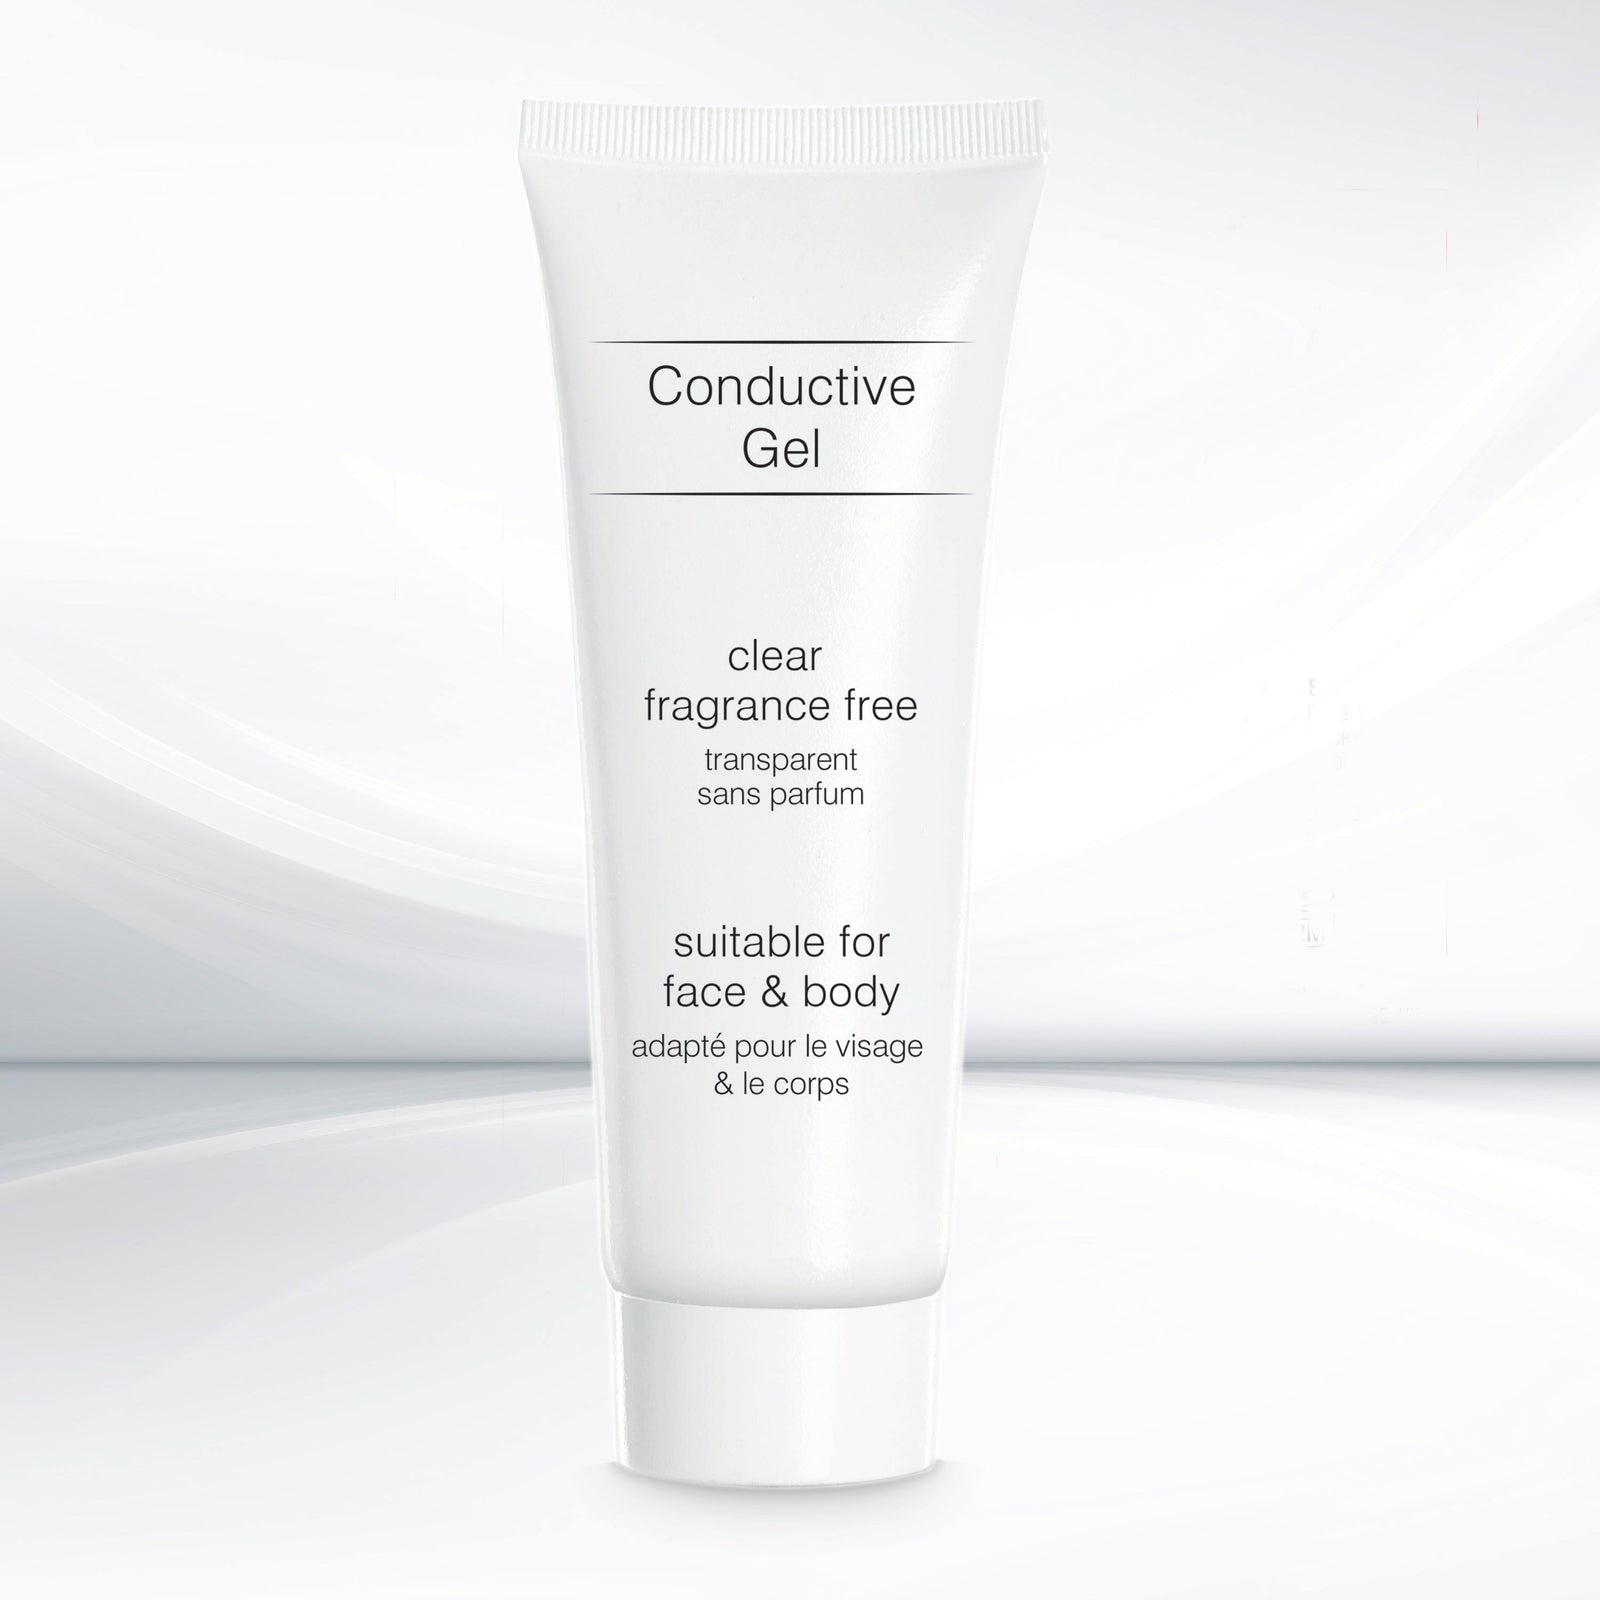 85ml tube of conductive gel suitable for face and body on a abstract background